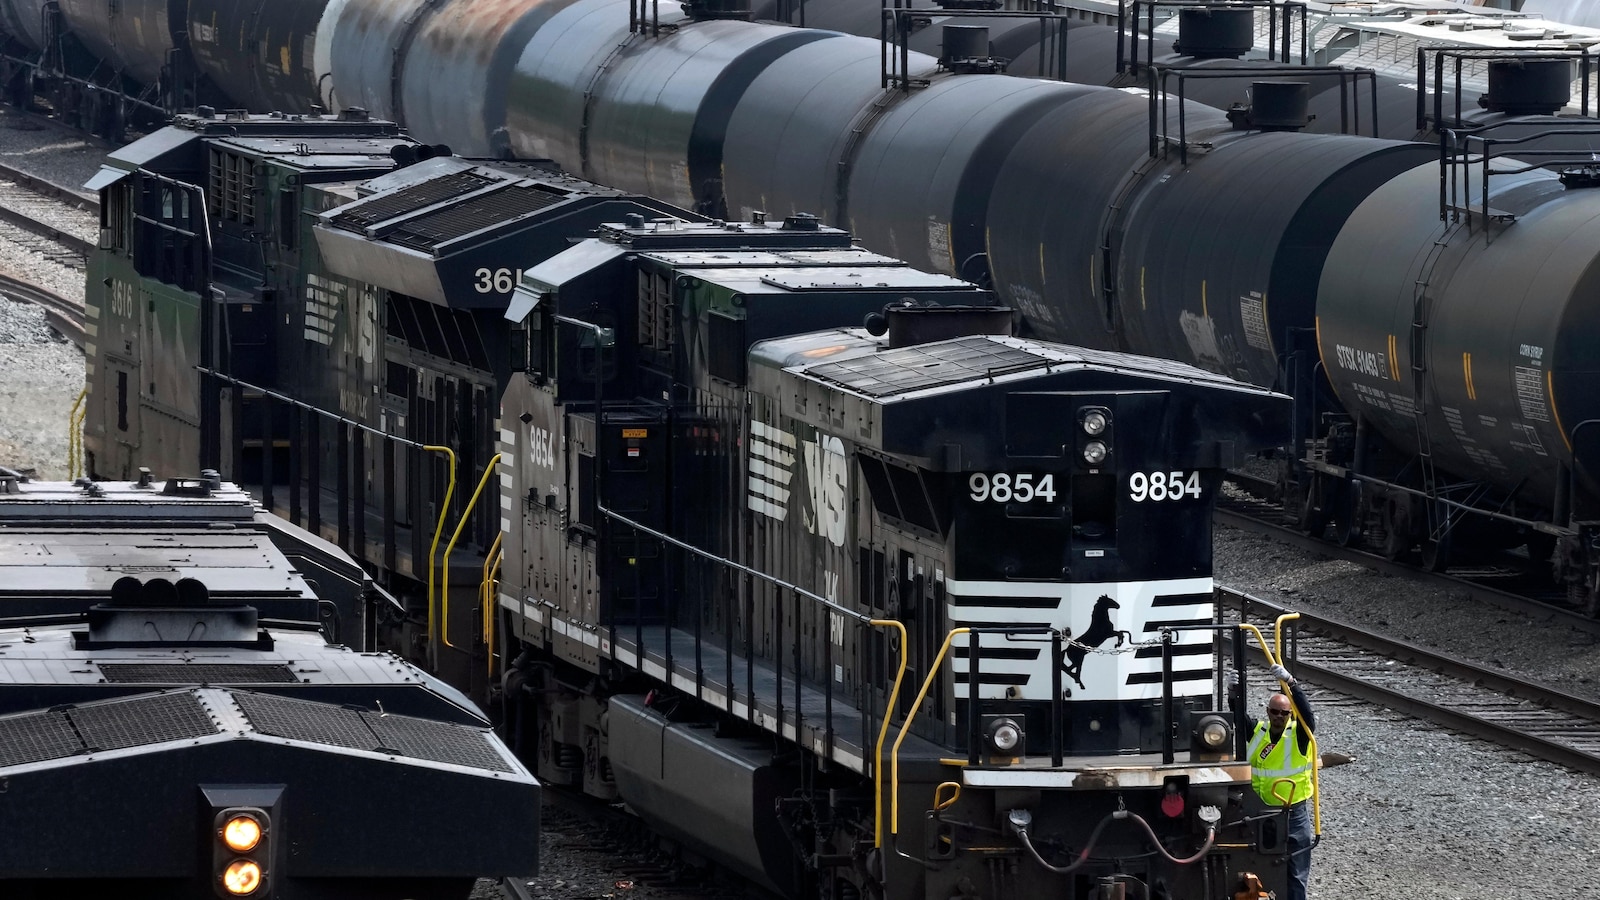 Activist investor wins three seats on Norfolk Southern's board of directors, but has no control over firing CEO